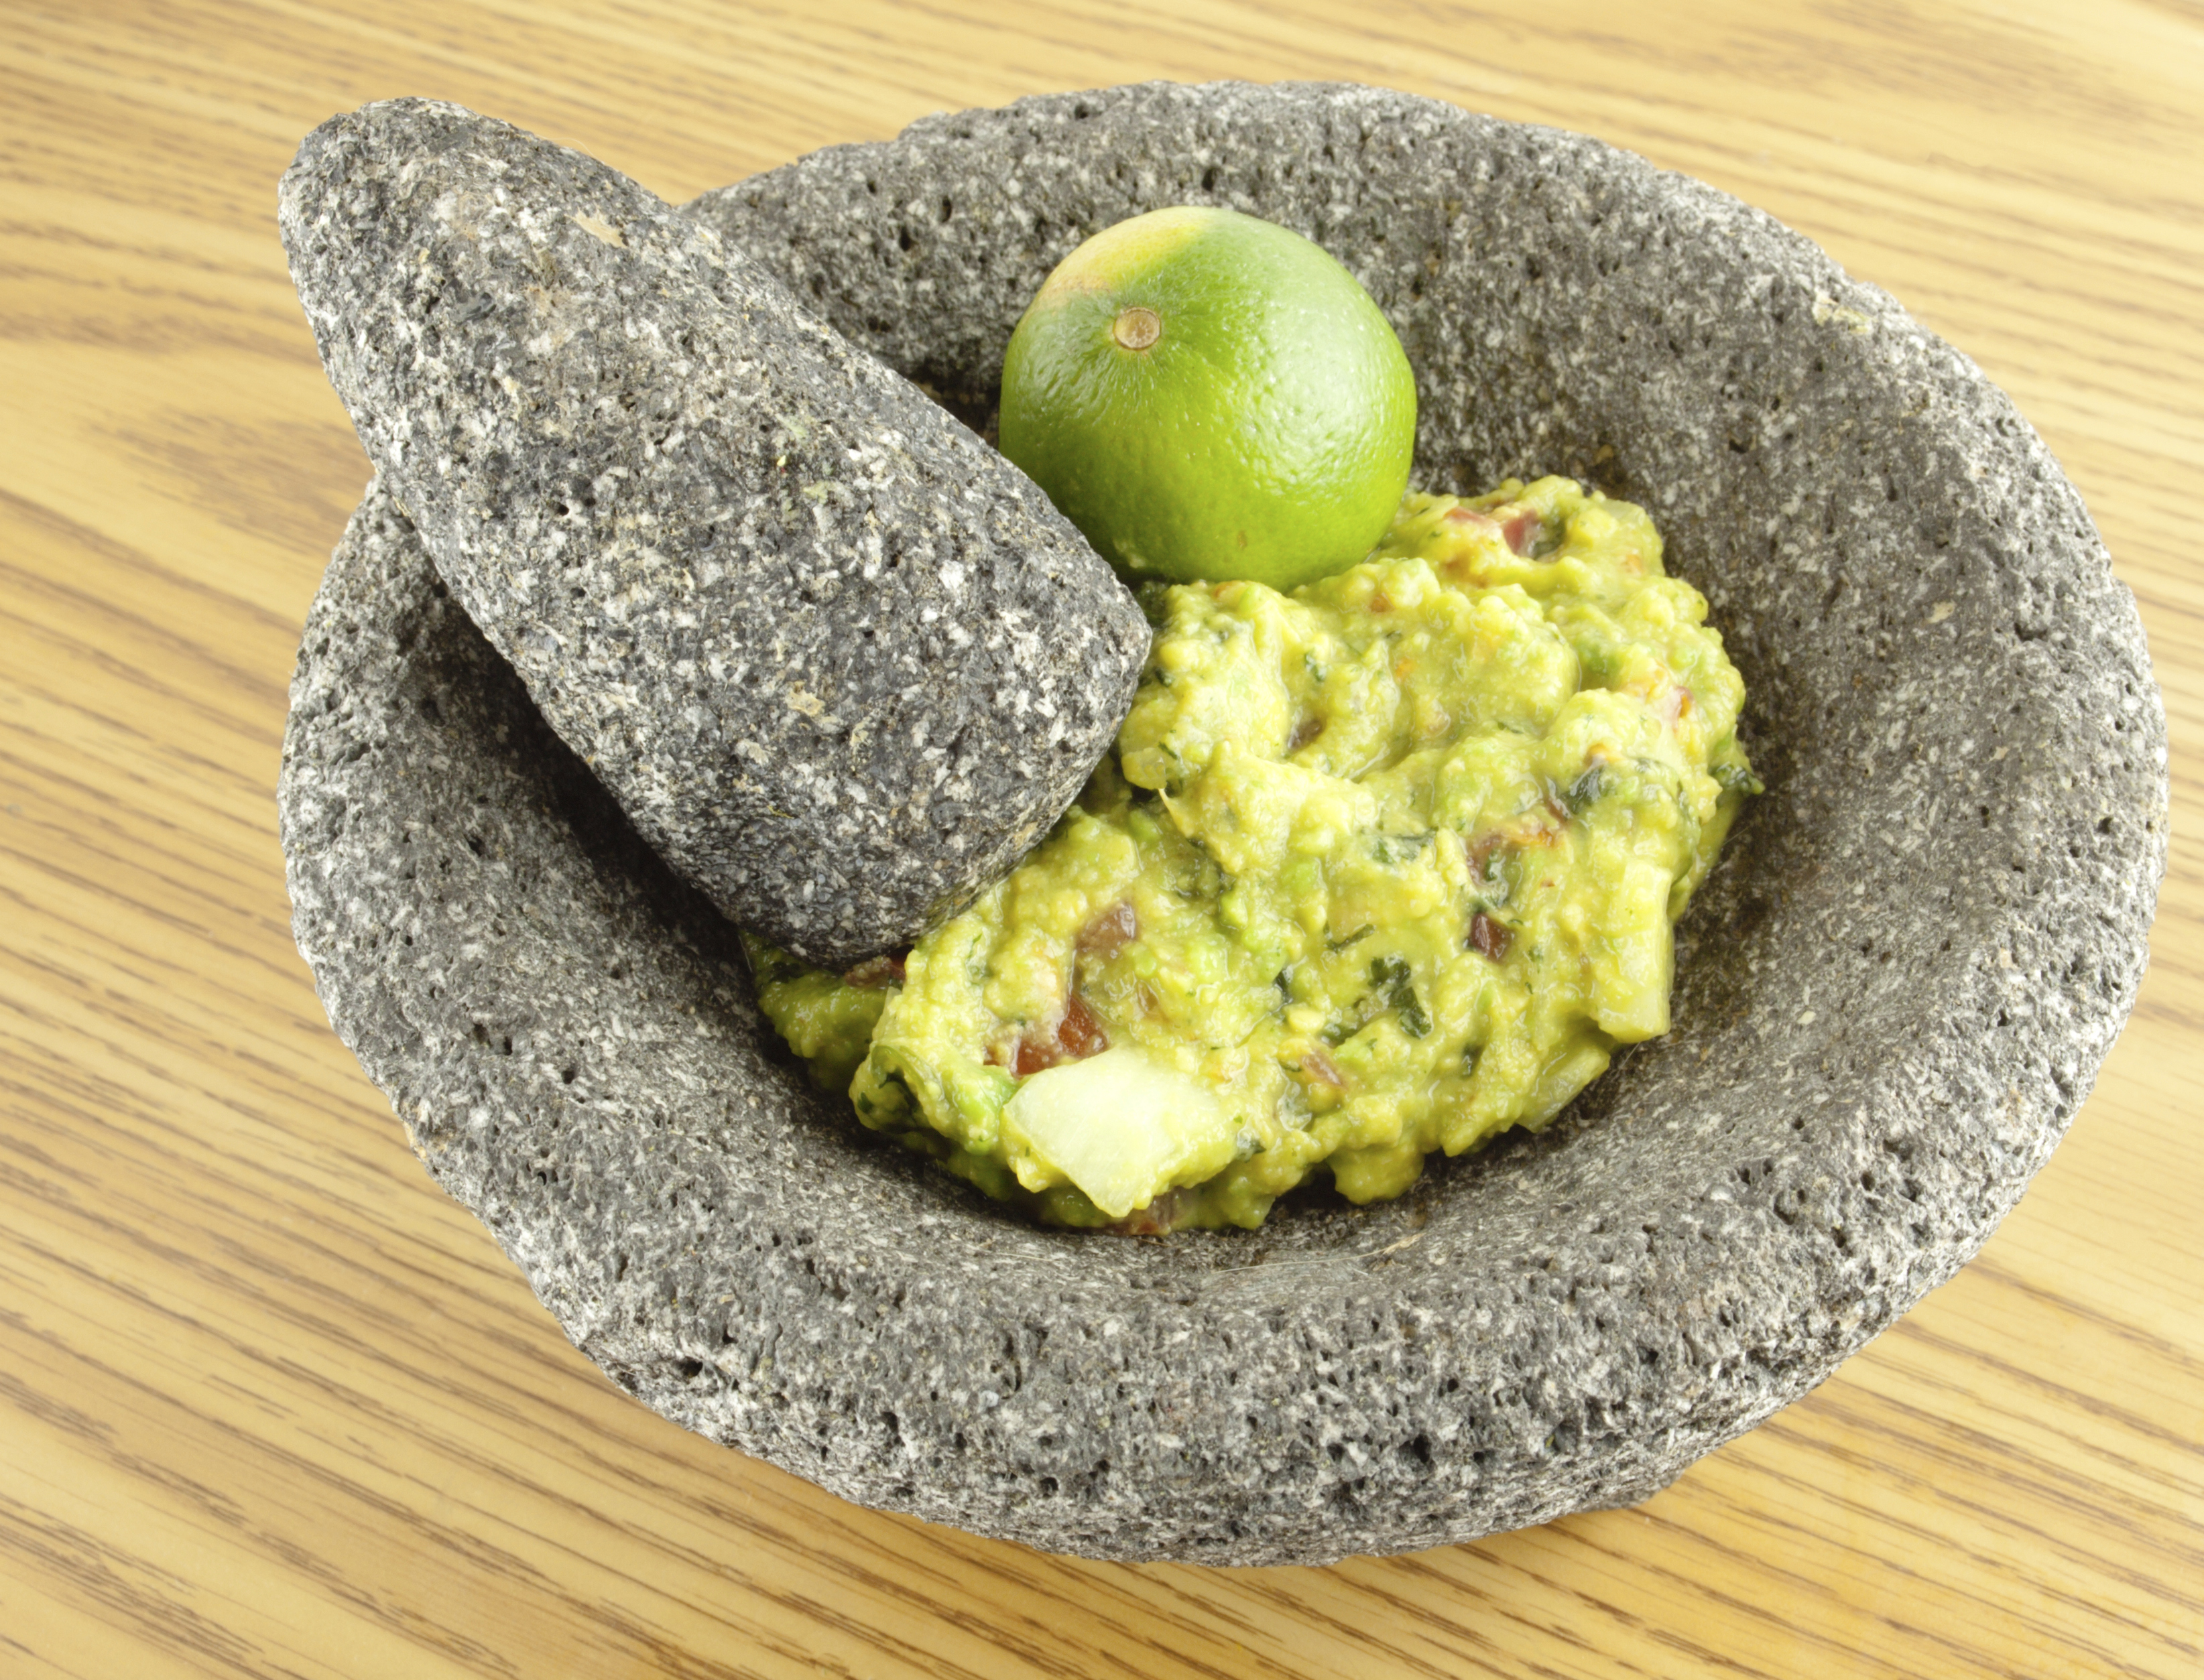 Mortar And Pestle Vs. Molcajete: What's The Difference?